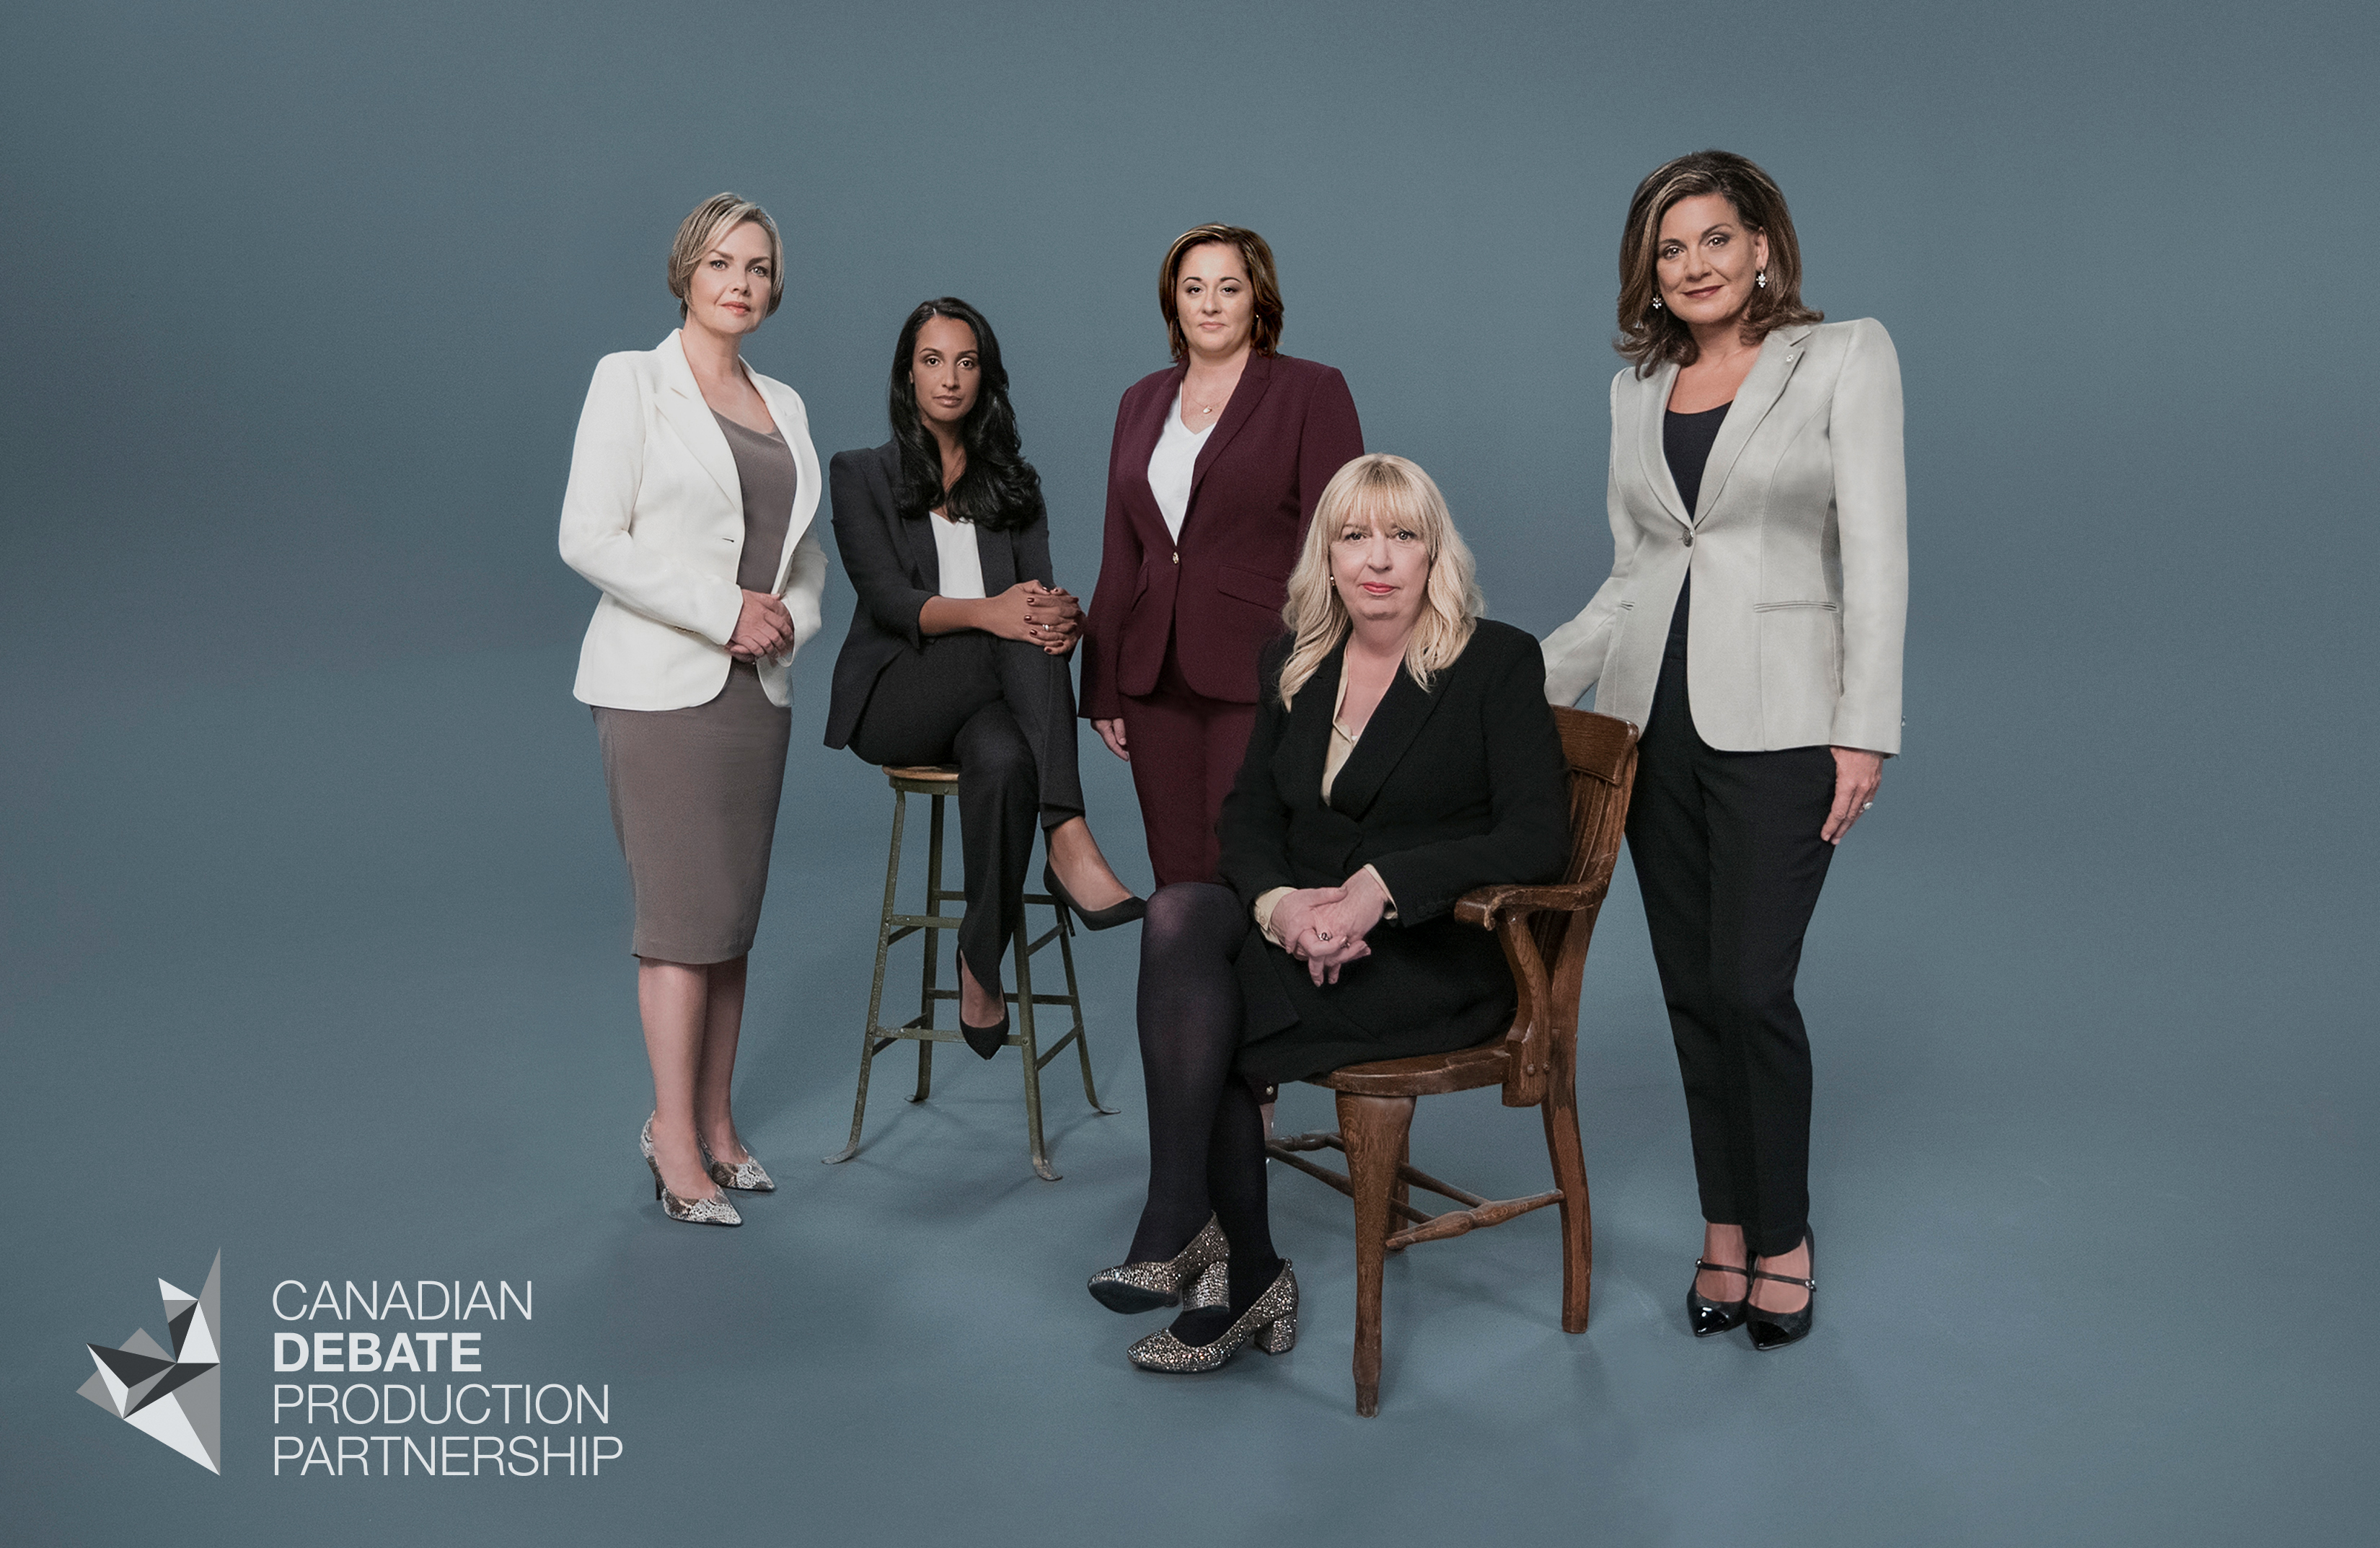 Canadian Debate Production Partnership, Monday, October 7, 2019, Press release picture